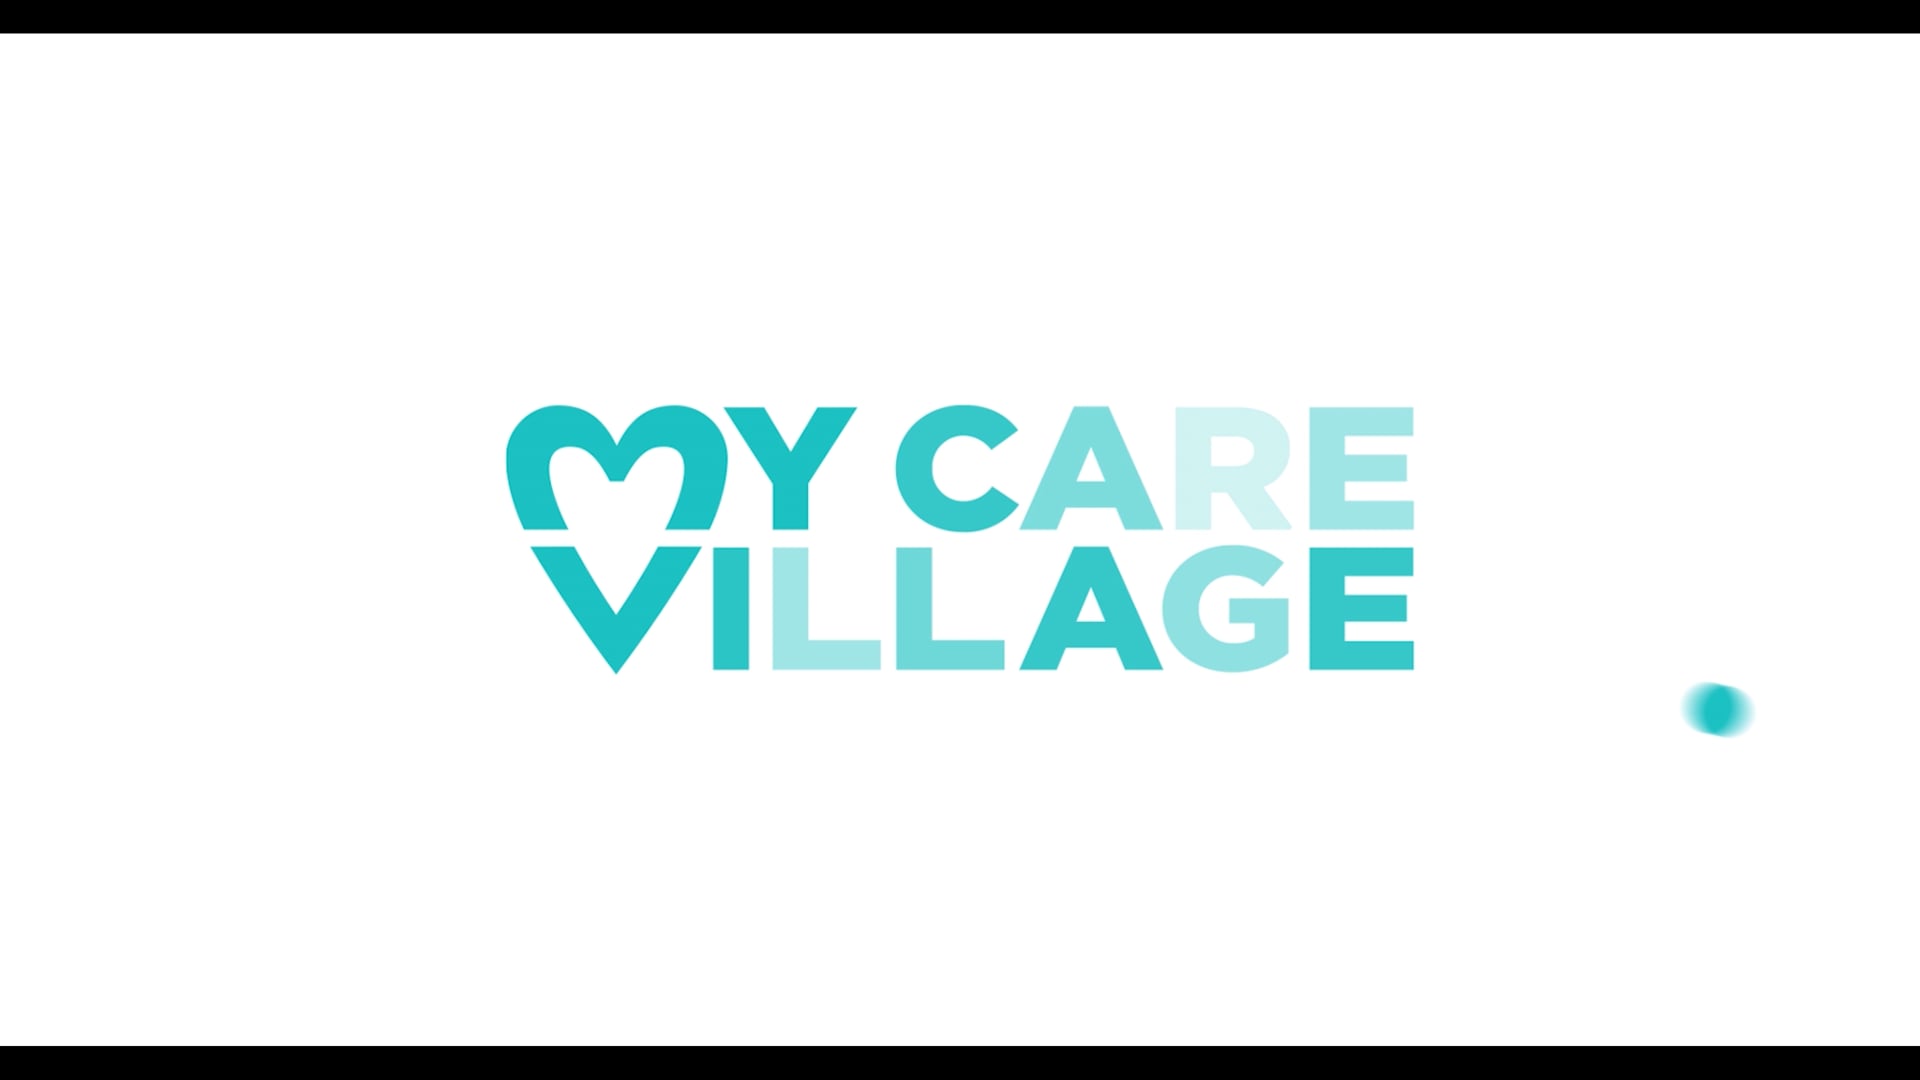 My Care Village - Overview  - Final